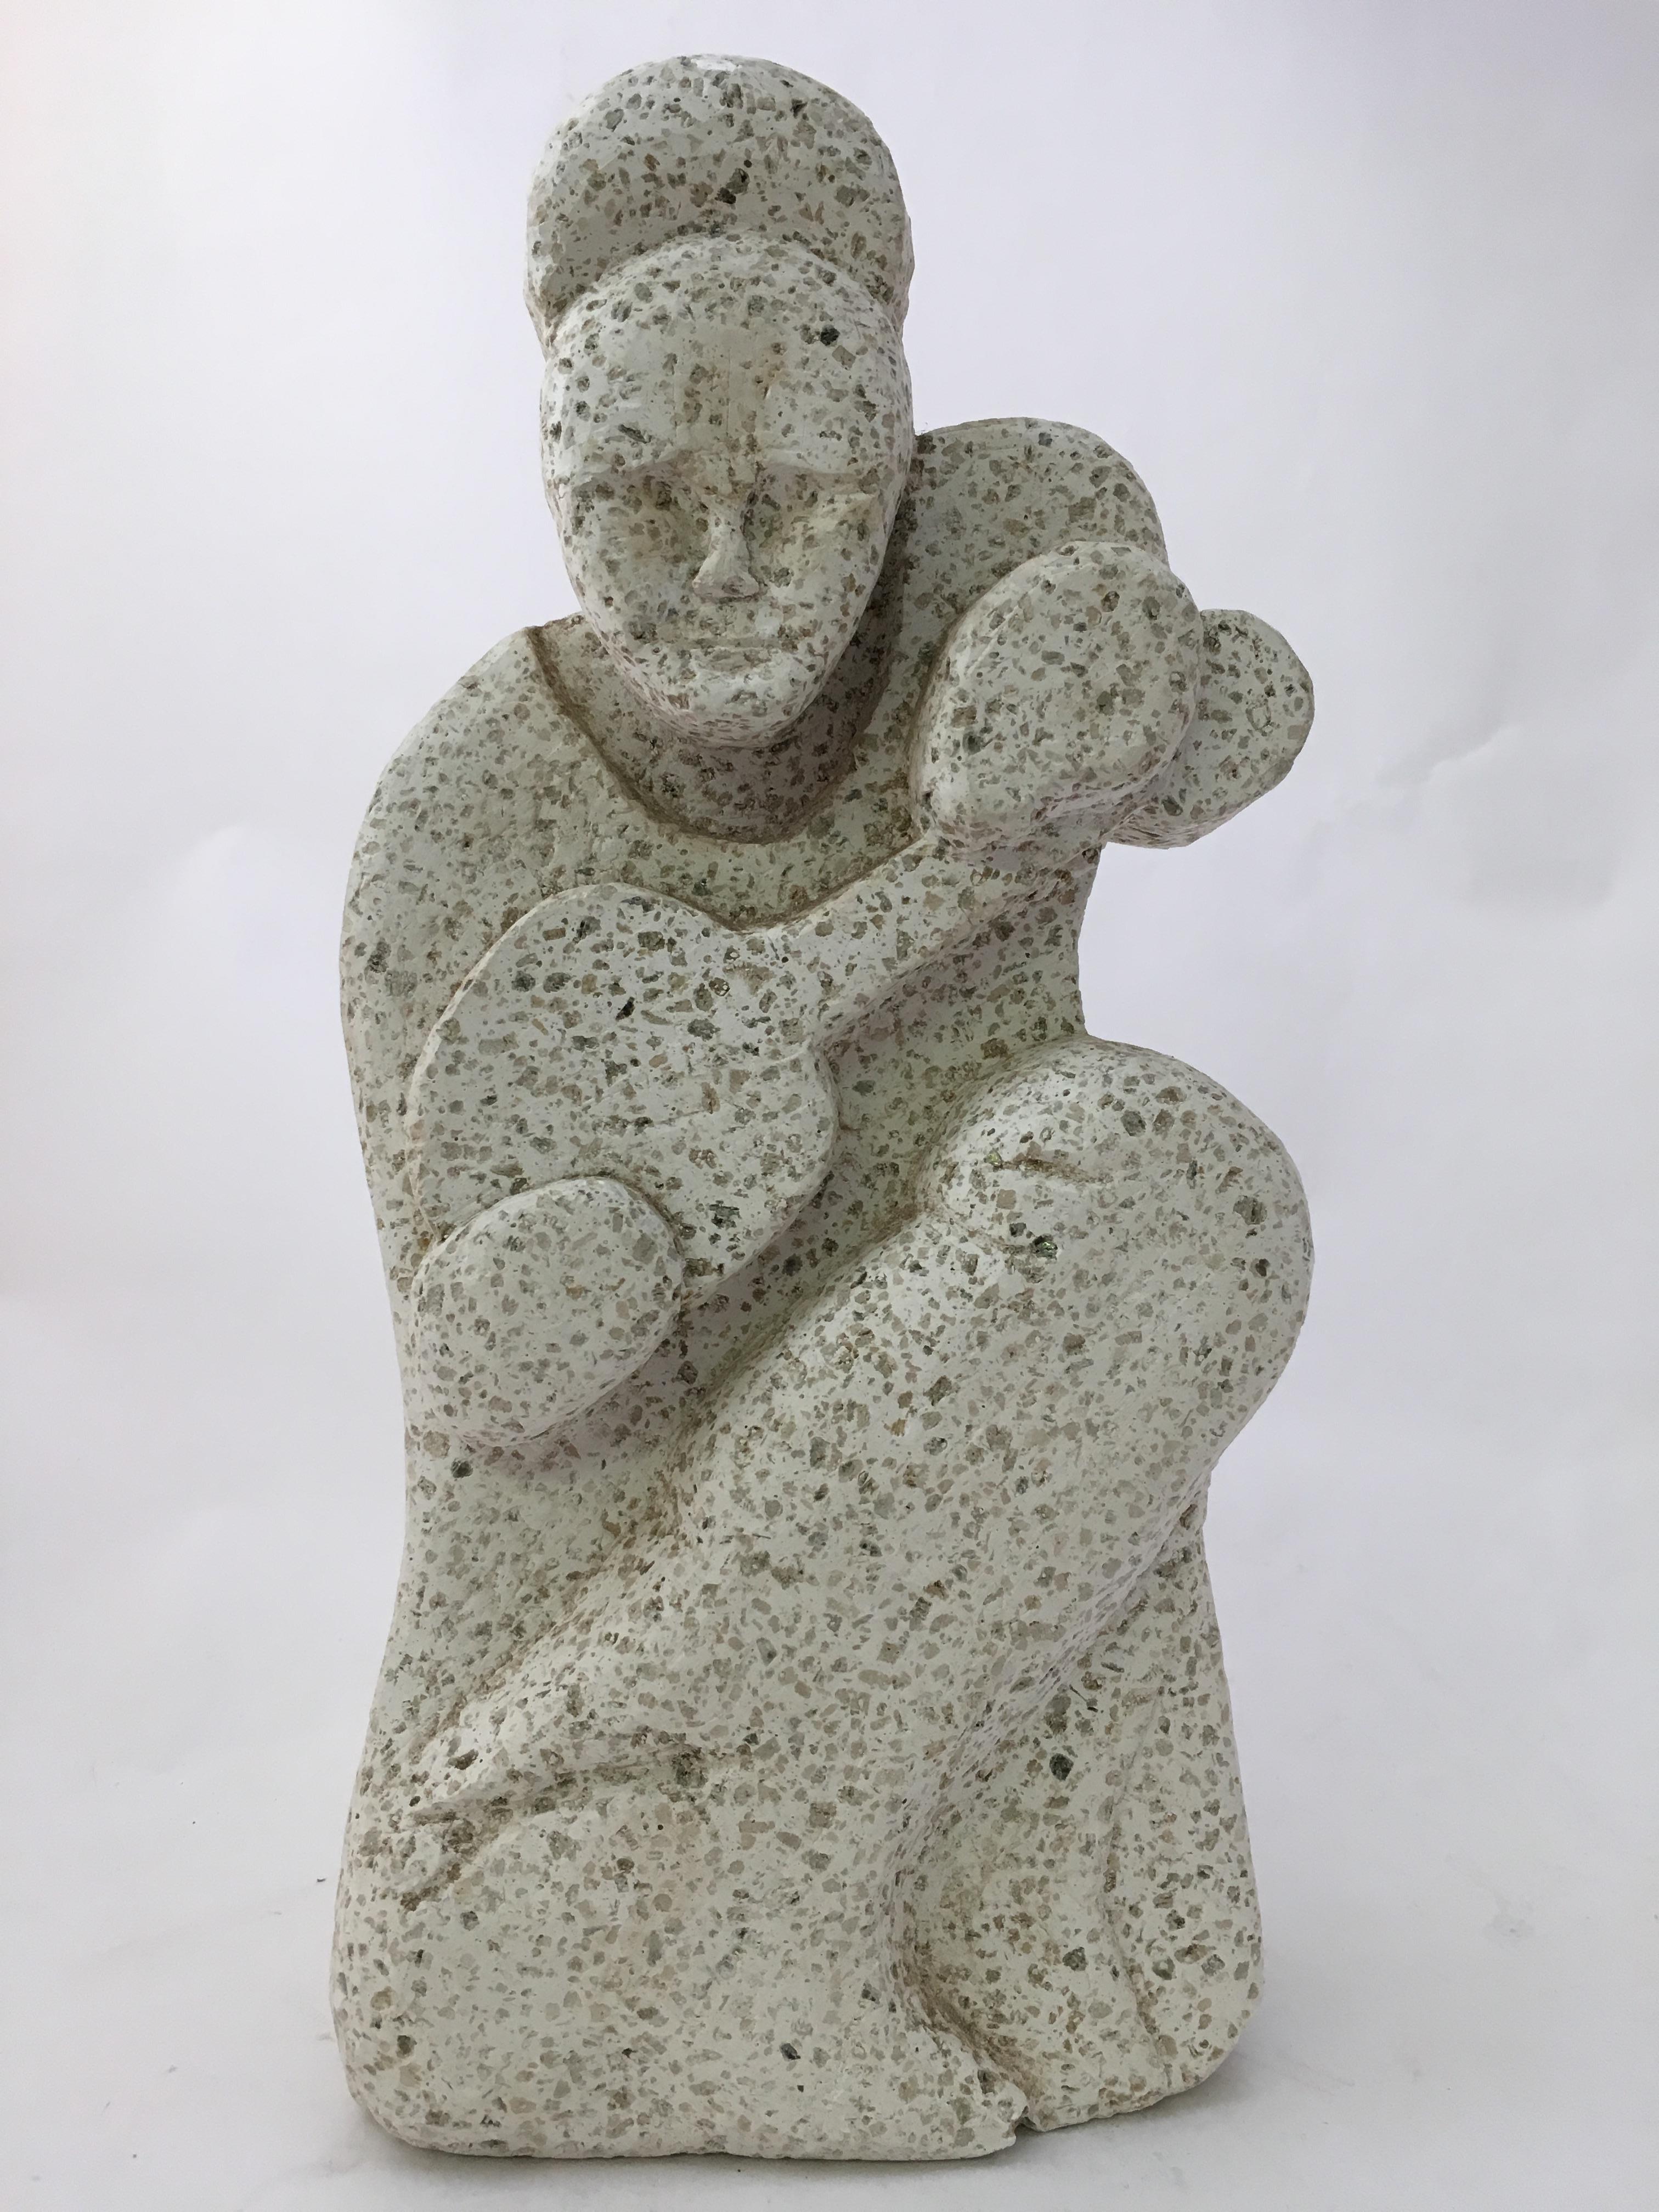 Wonderful cast terrazzo sculpture of a guitar player or other smaller stringed instrument, circa 1950-1960. The terrazzo medium is quite unique in sculpture form. Terrazzo is a composite material cast with a Binder or polymeric of marble chips,